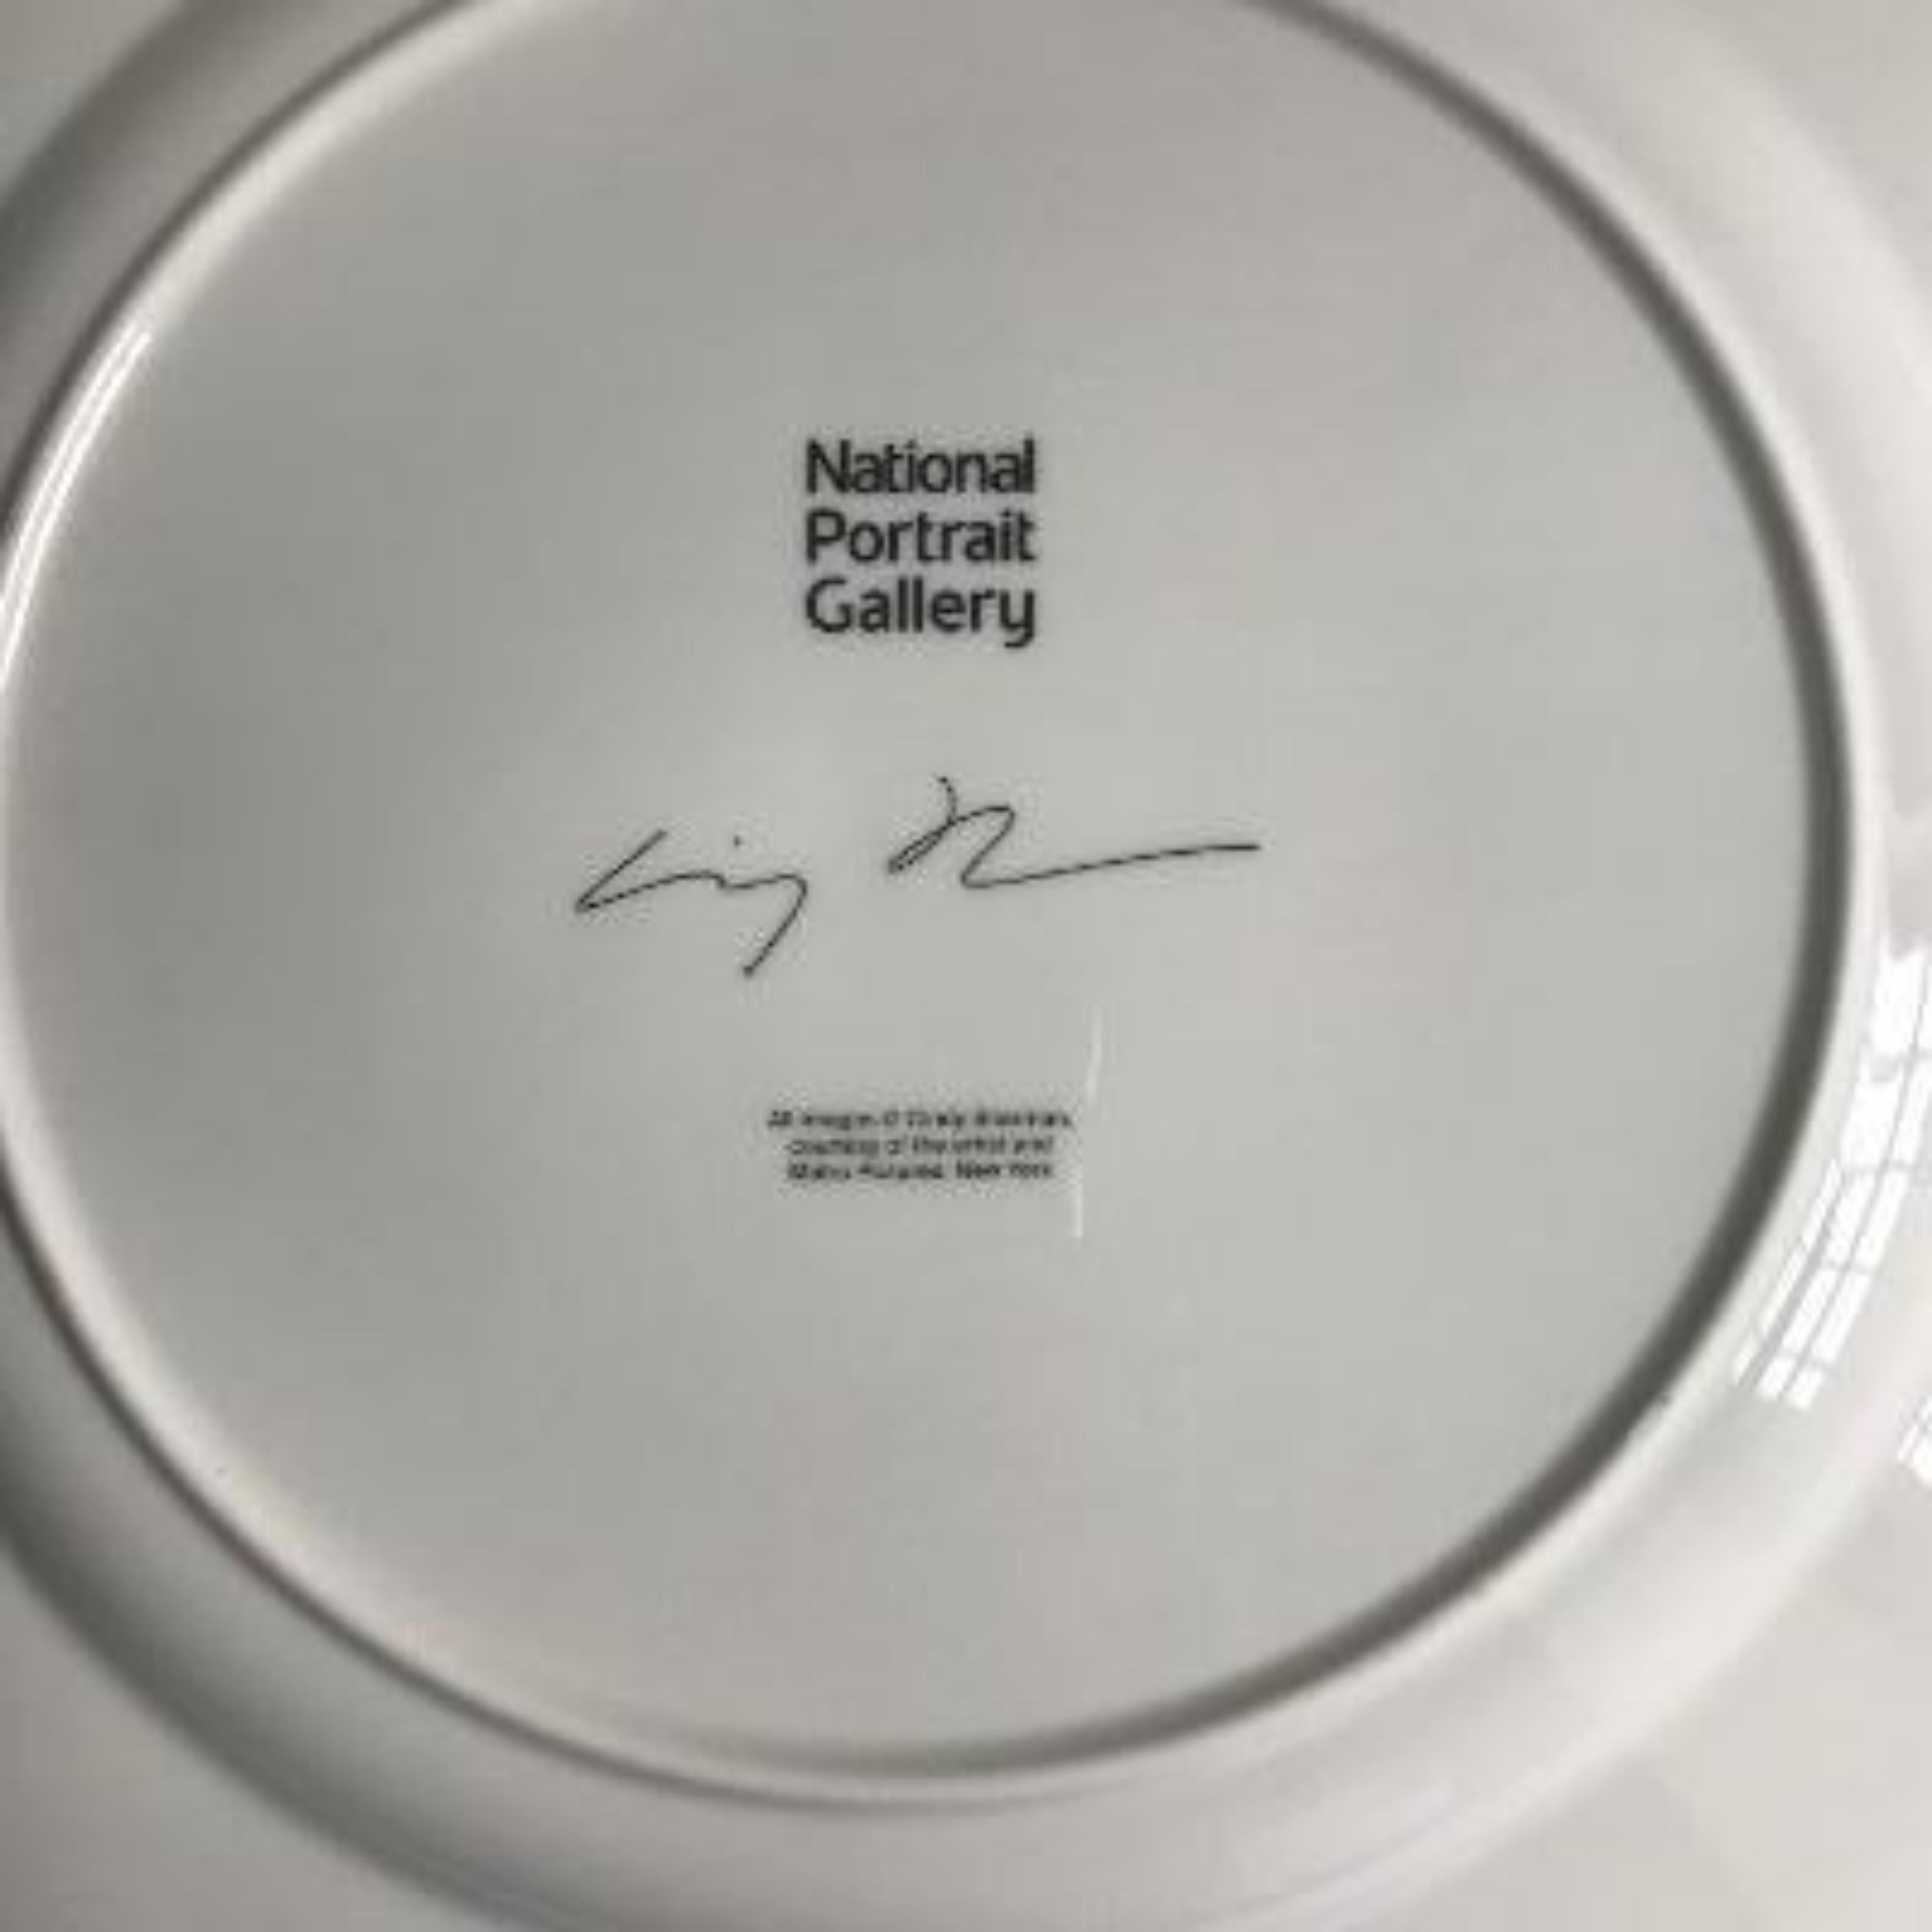 The Nine Lives of Cindy, porcelain plate & official COA in box Lt Edition of 100 - Contemporary Mixed Media Art by Cindy Sherman